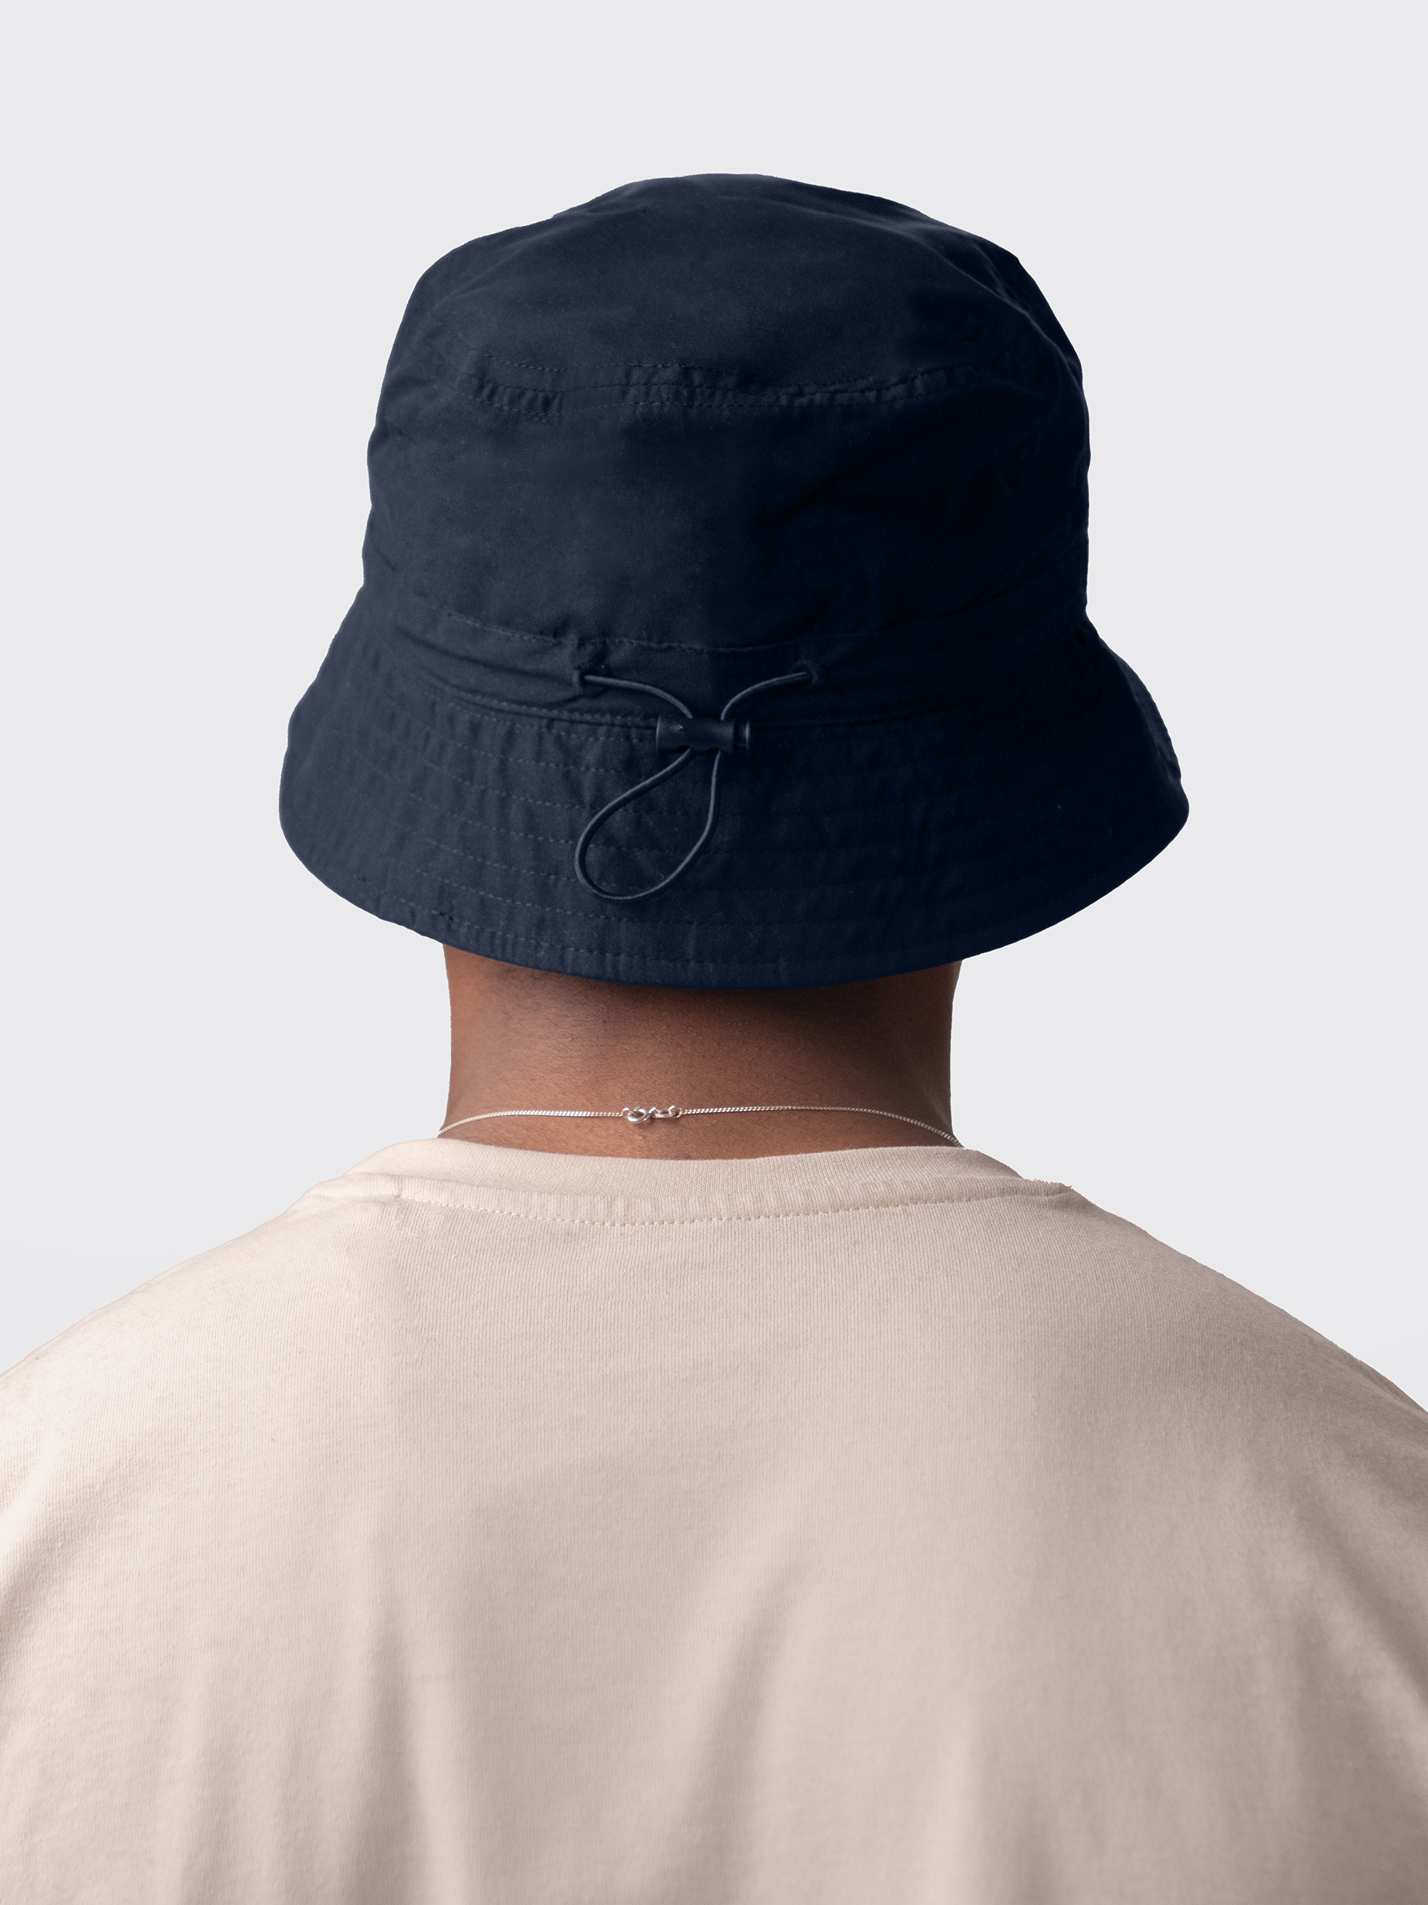 Sustainable bucket hat, made from eco-friendly recycled polyester